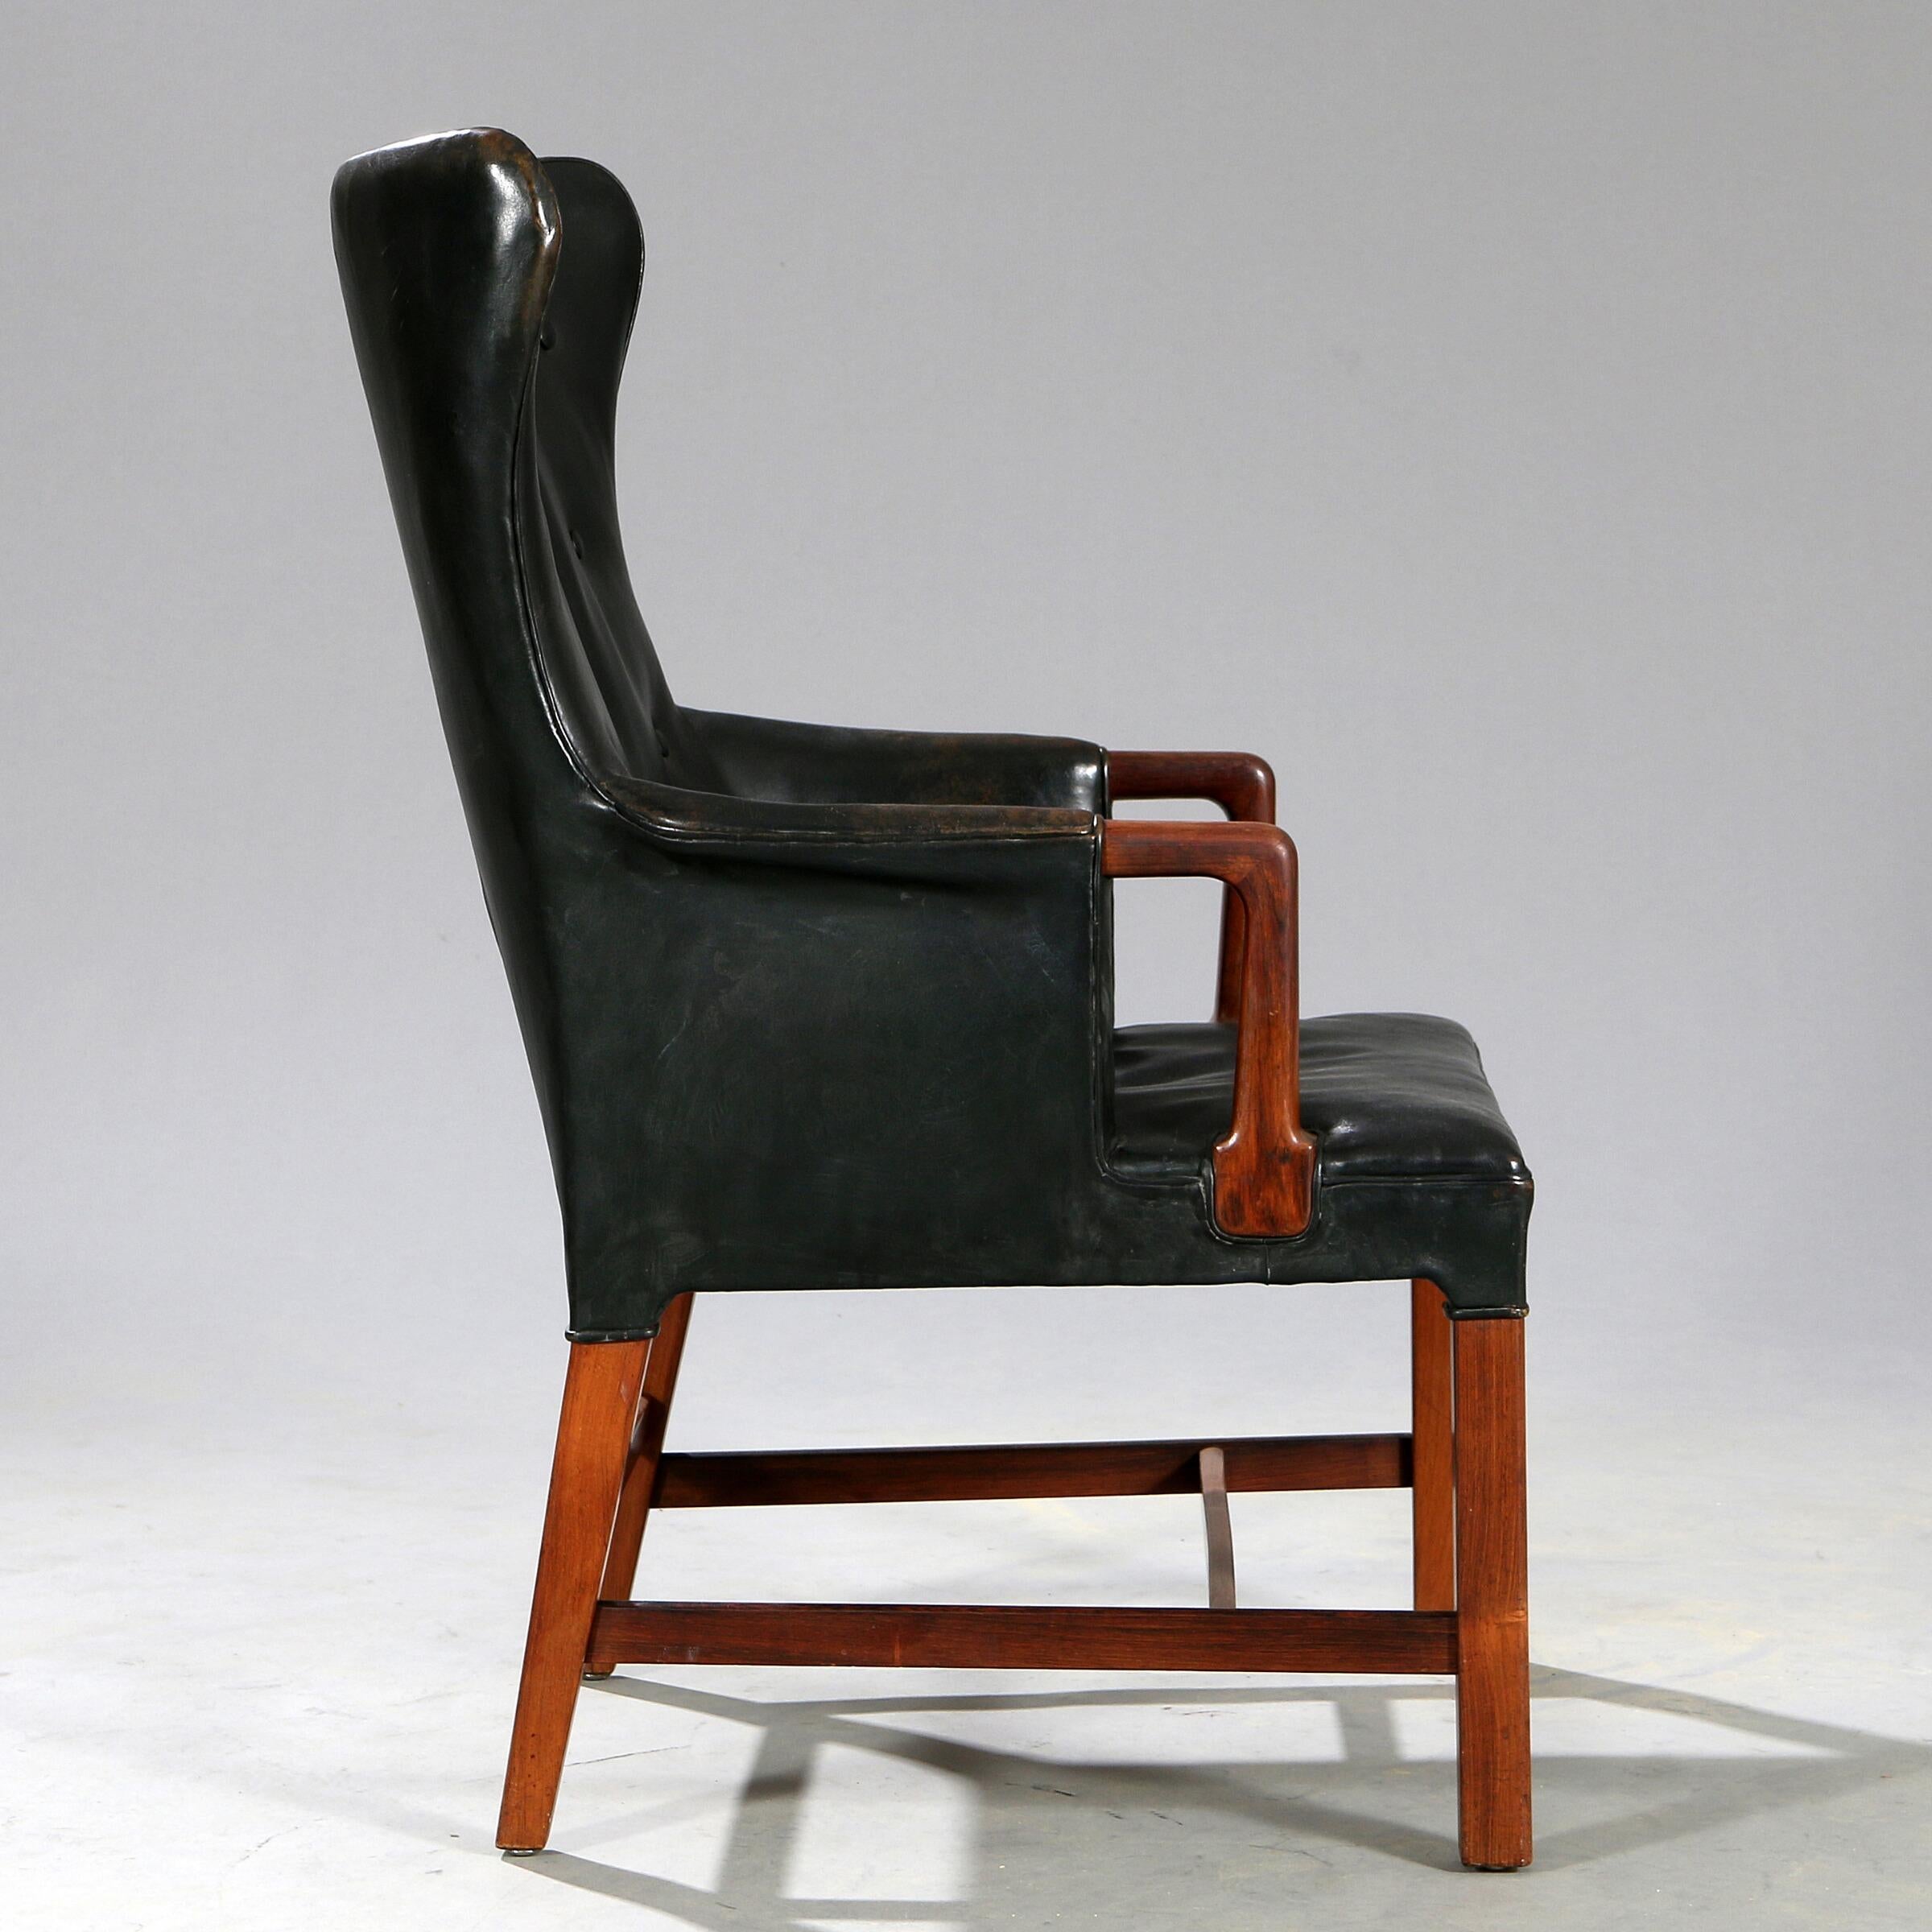 Easy chair with Brazilian rosewood frame. Seat, sides and button fitted back upholstered with black leather. Made by cabinetmaker Thorald Madsen.

Literature: Grete Jalk [ed.]: “40 Years of Danish Furniture Design”, similar chair ill. vol. 2, p.